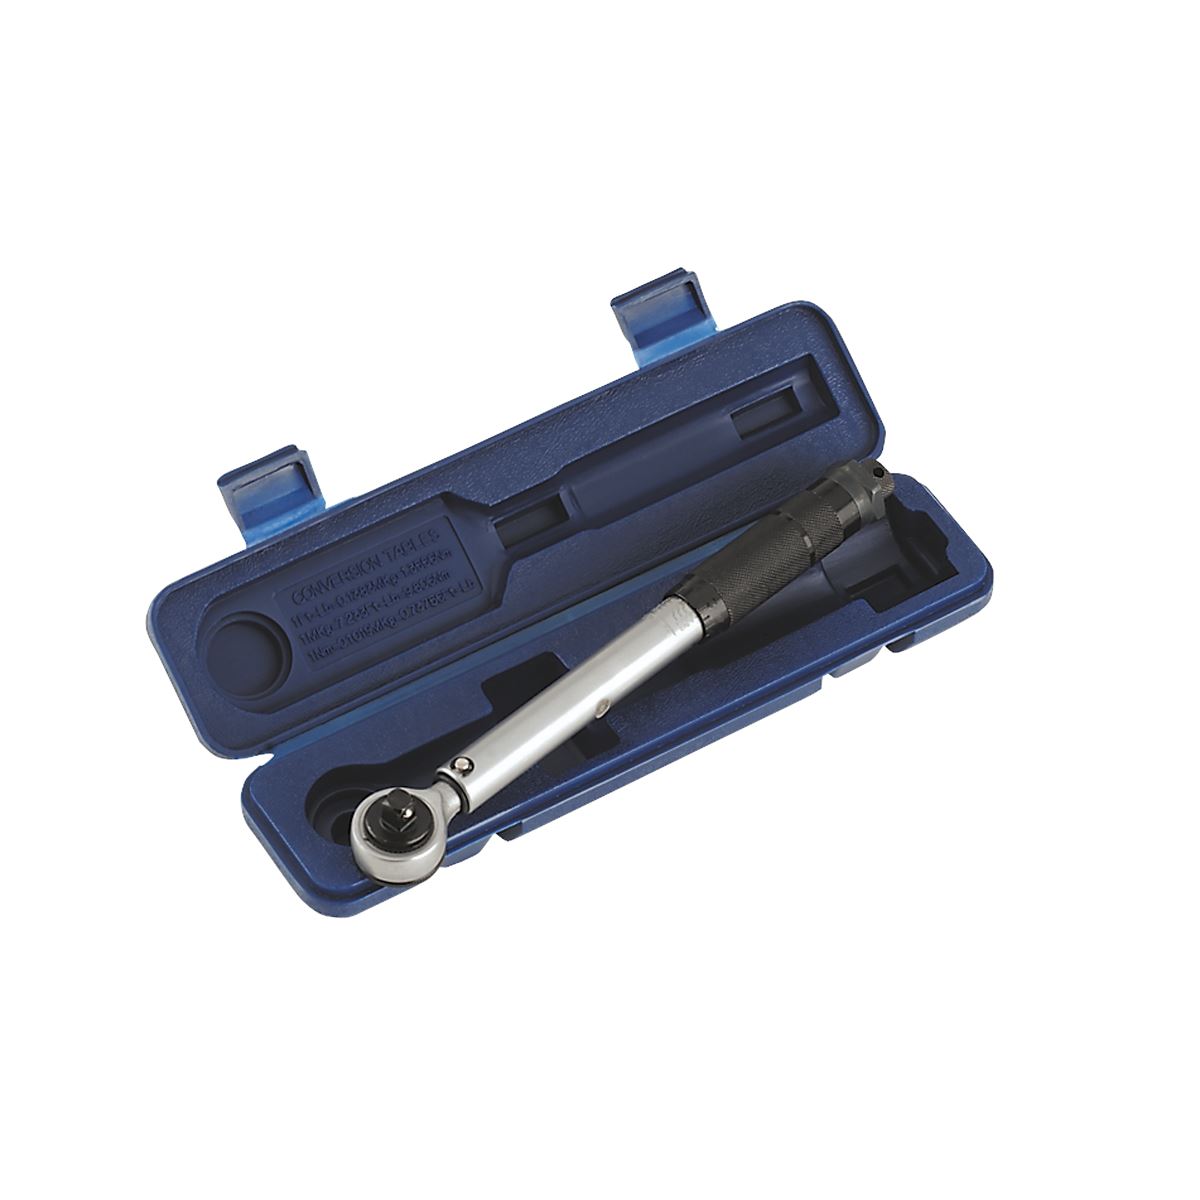 Sealey Micrometer Torque Wrench 3/8"Sq Drive Calibrated AK623